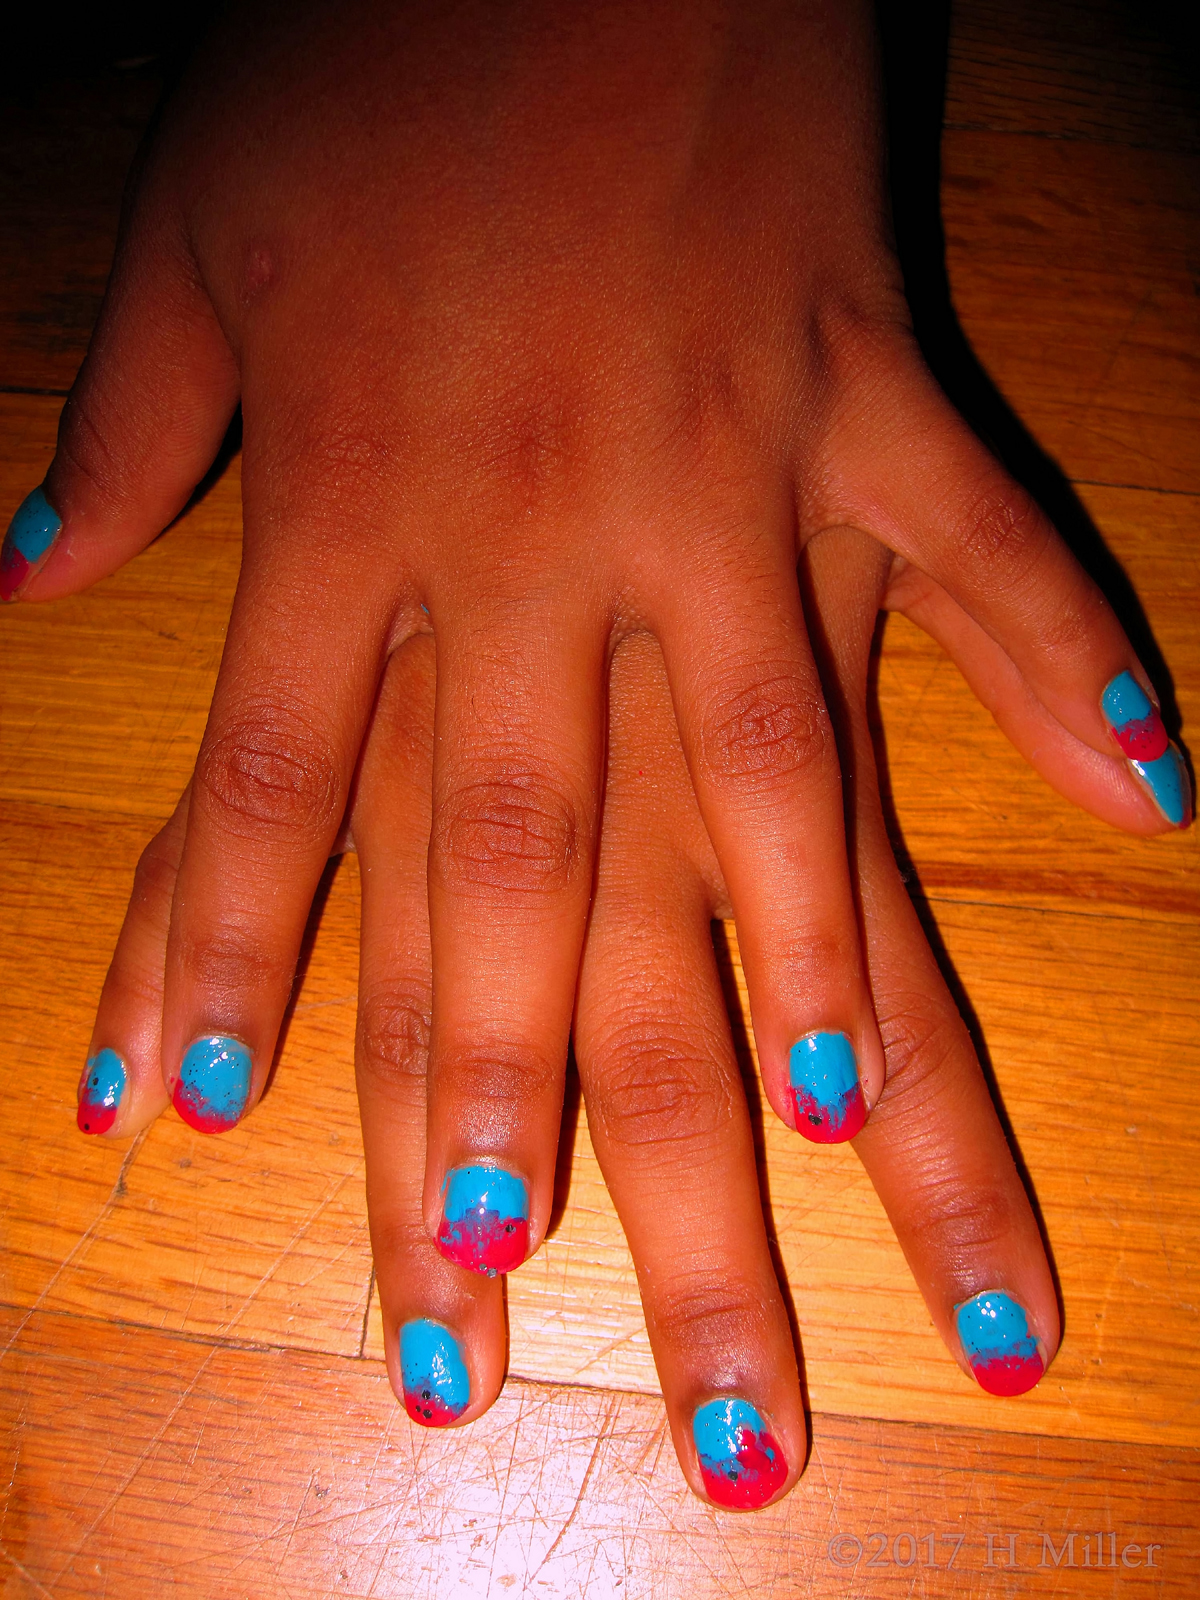 Such A Lovely Blue And Hot Pink Ombre Nail Art Design!